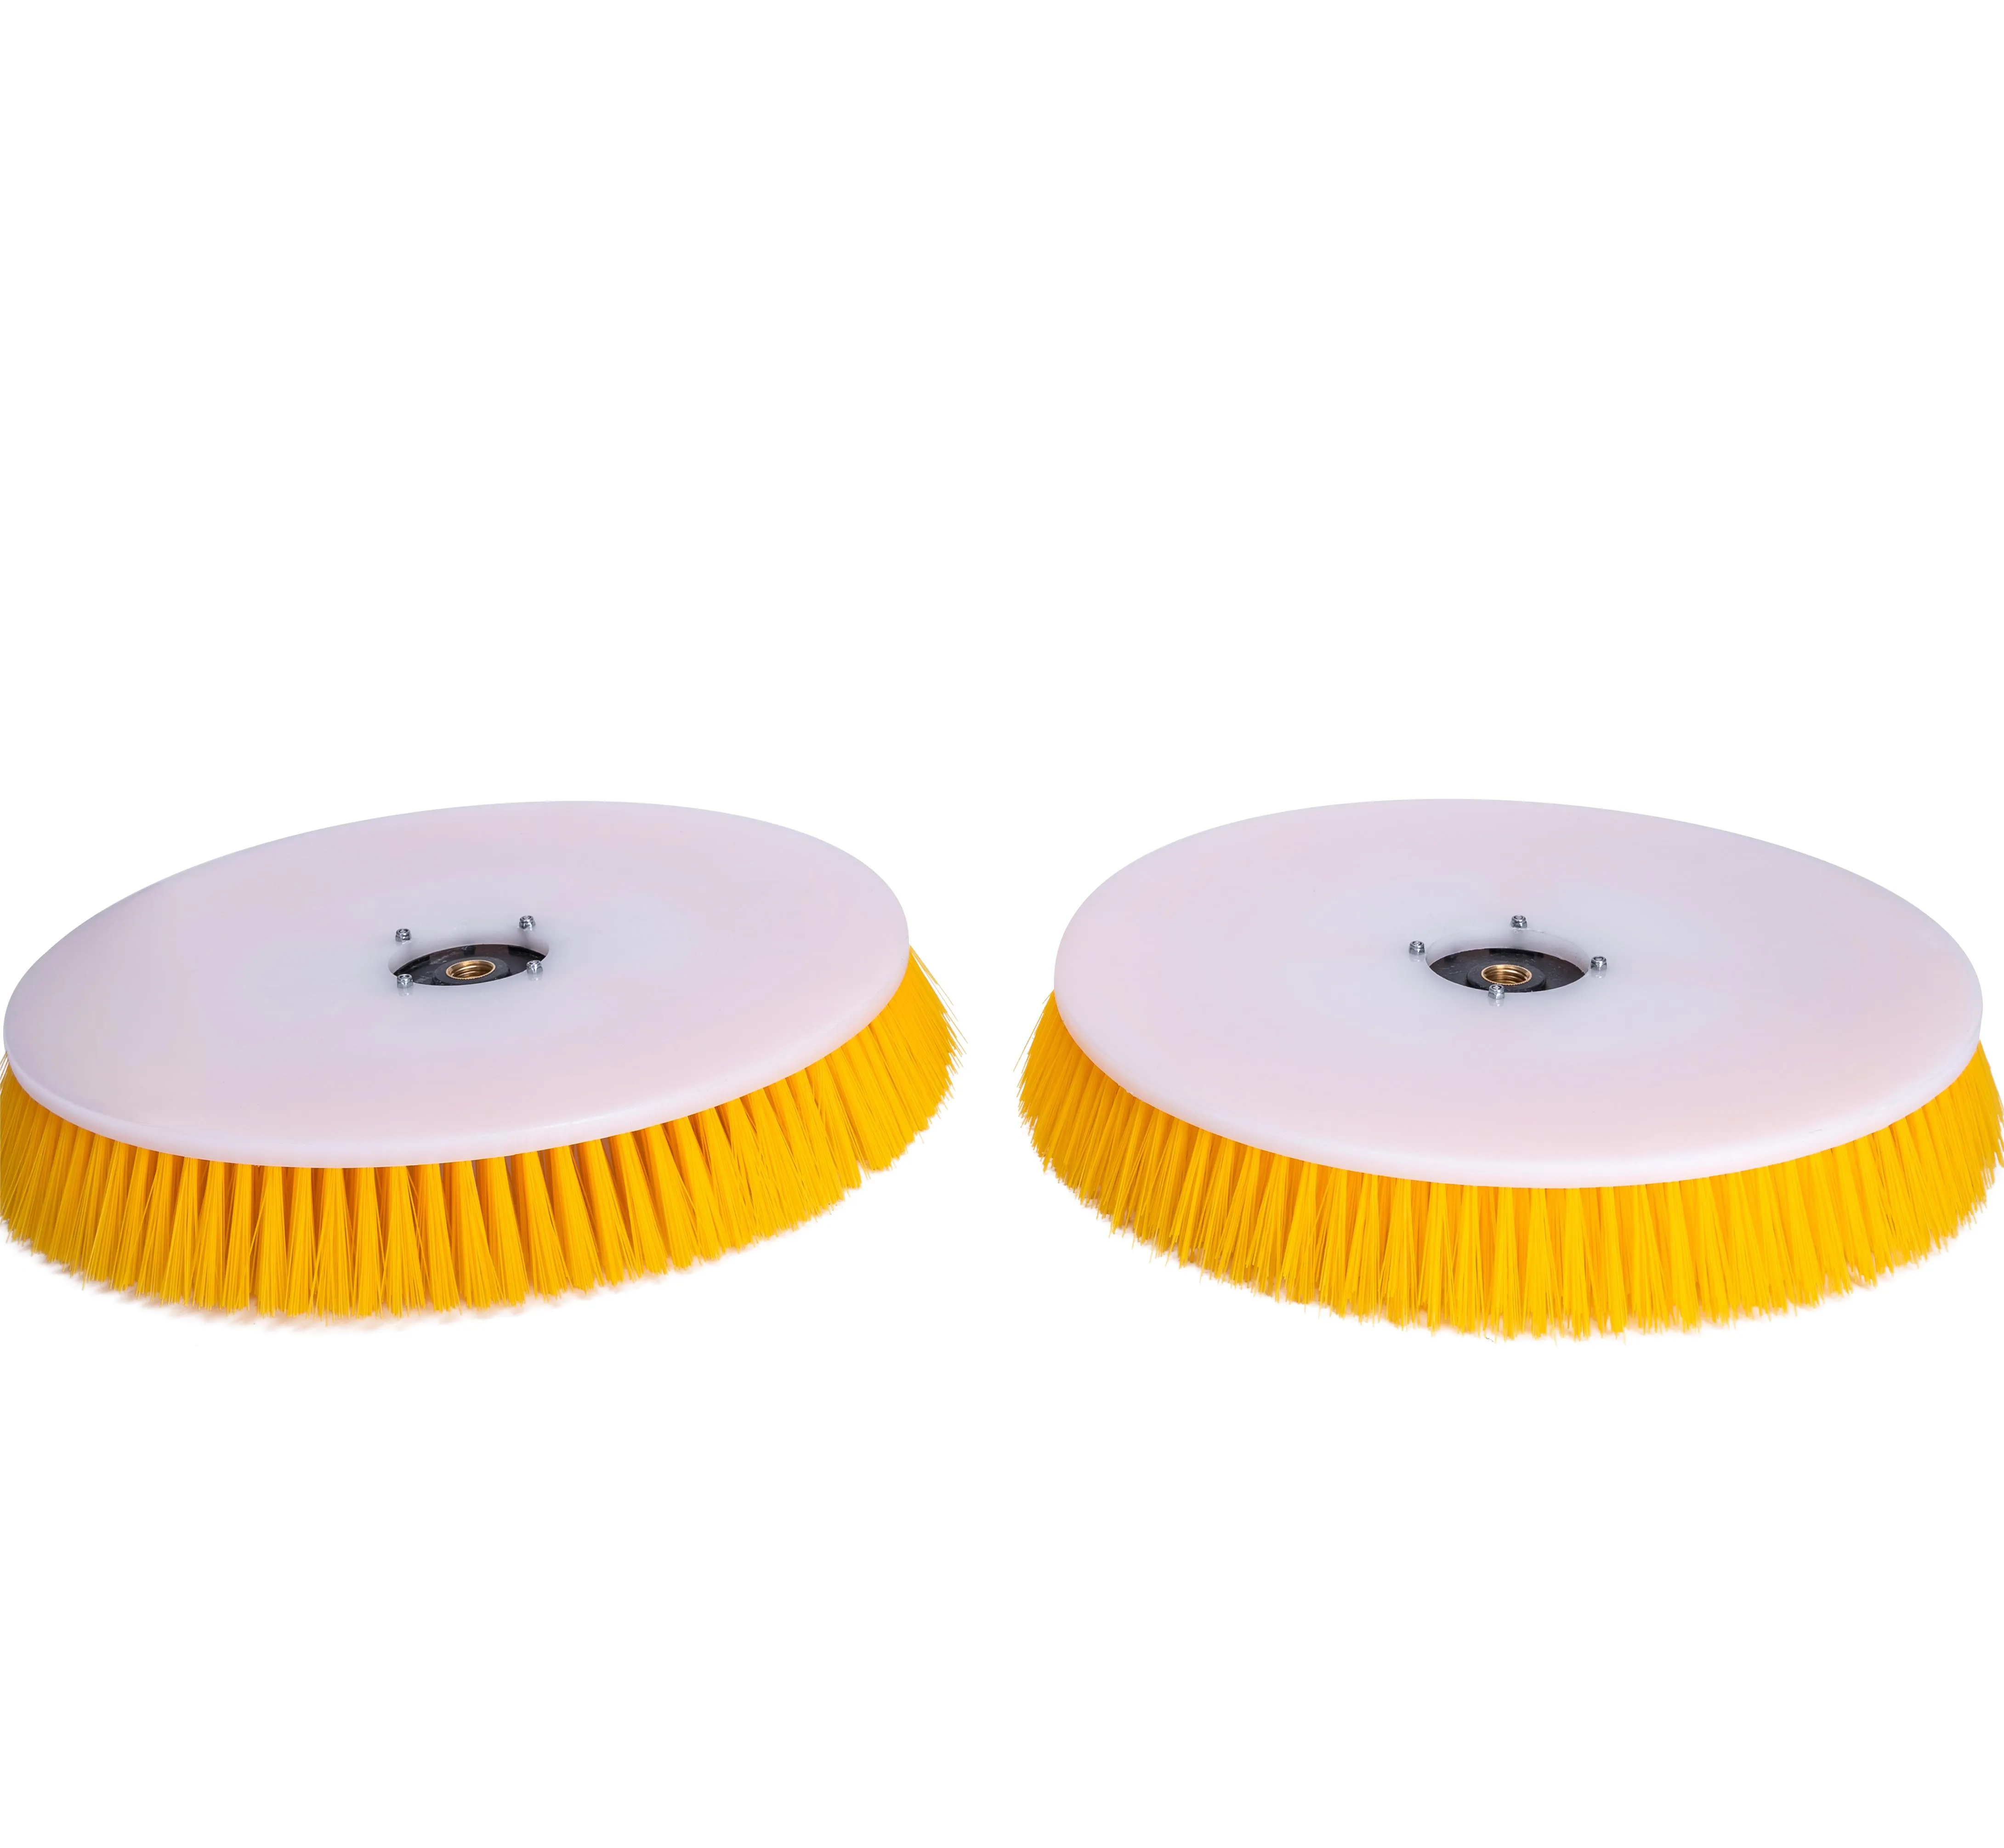 A pair of Replacement Brush Discs